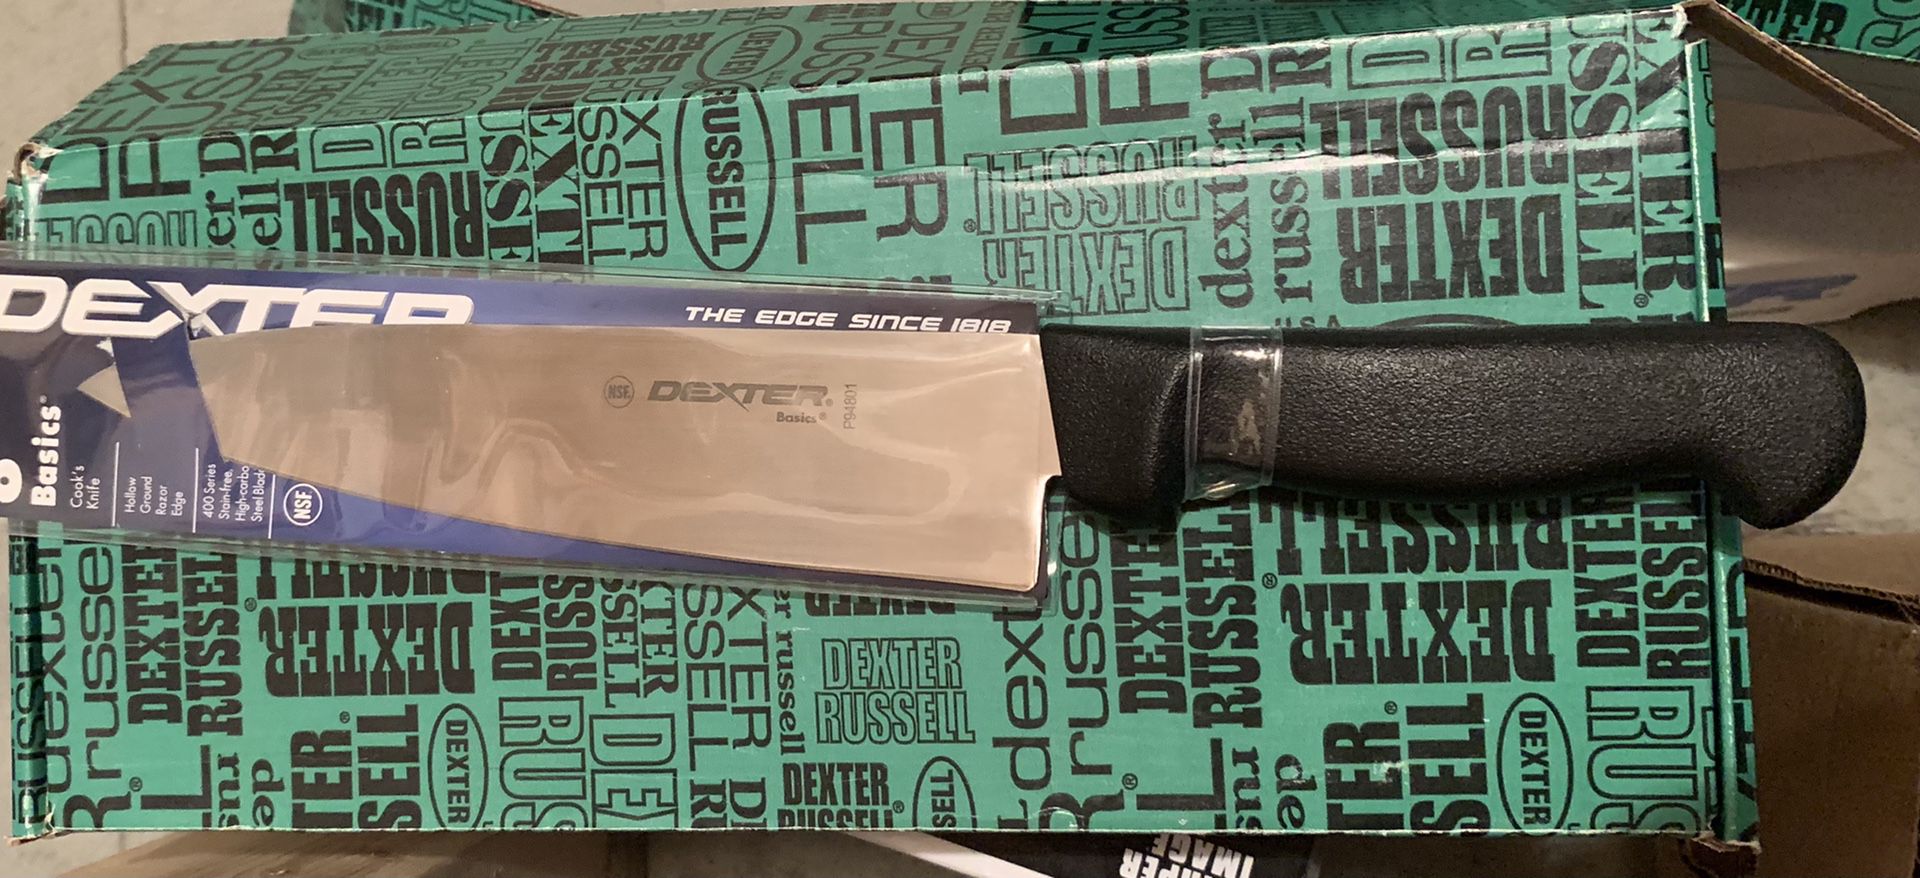 Brand new Dexter cutlery and accessories.